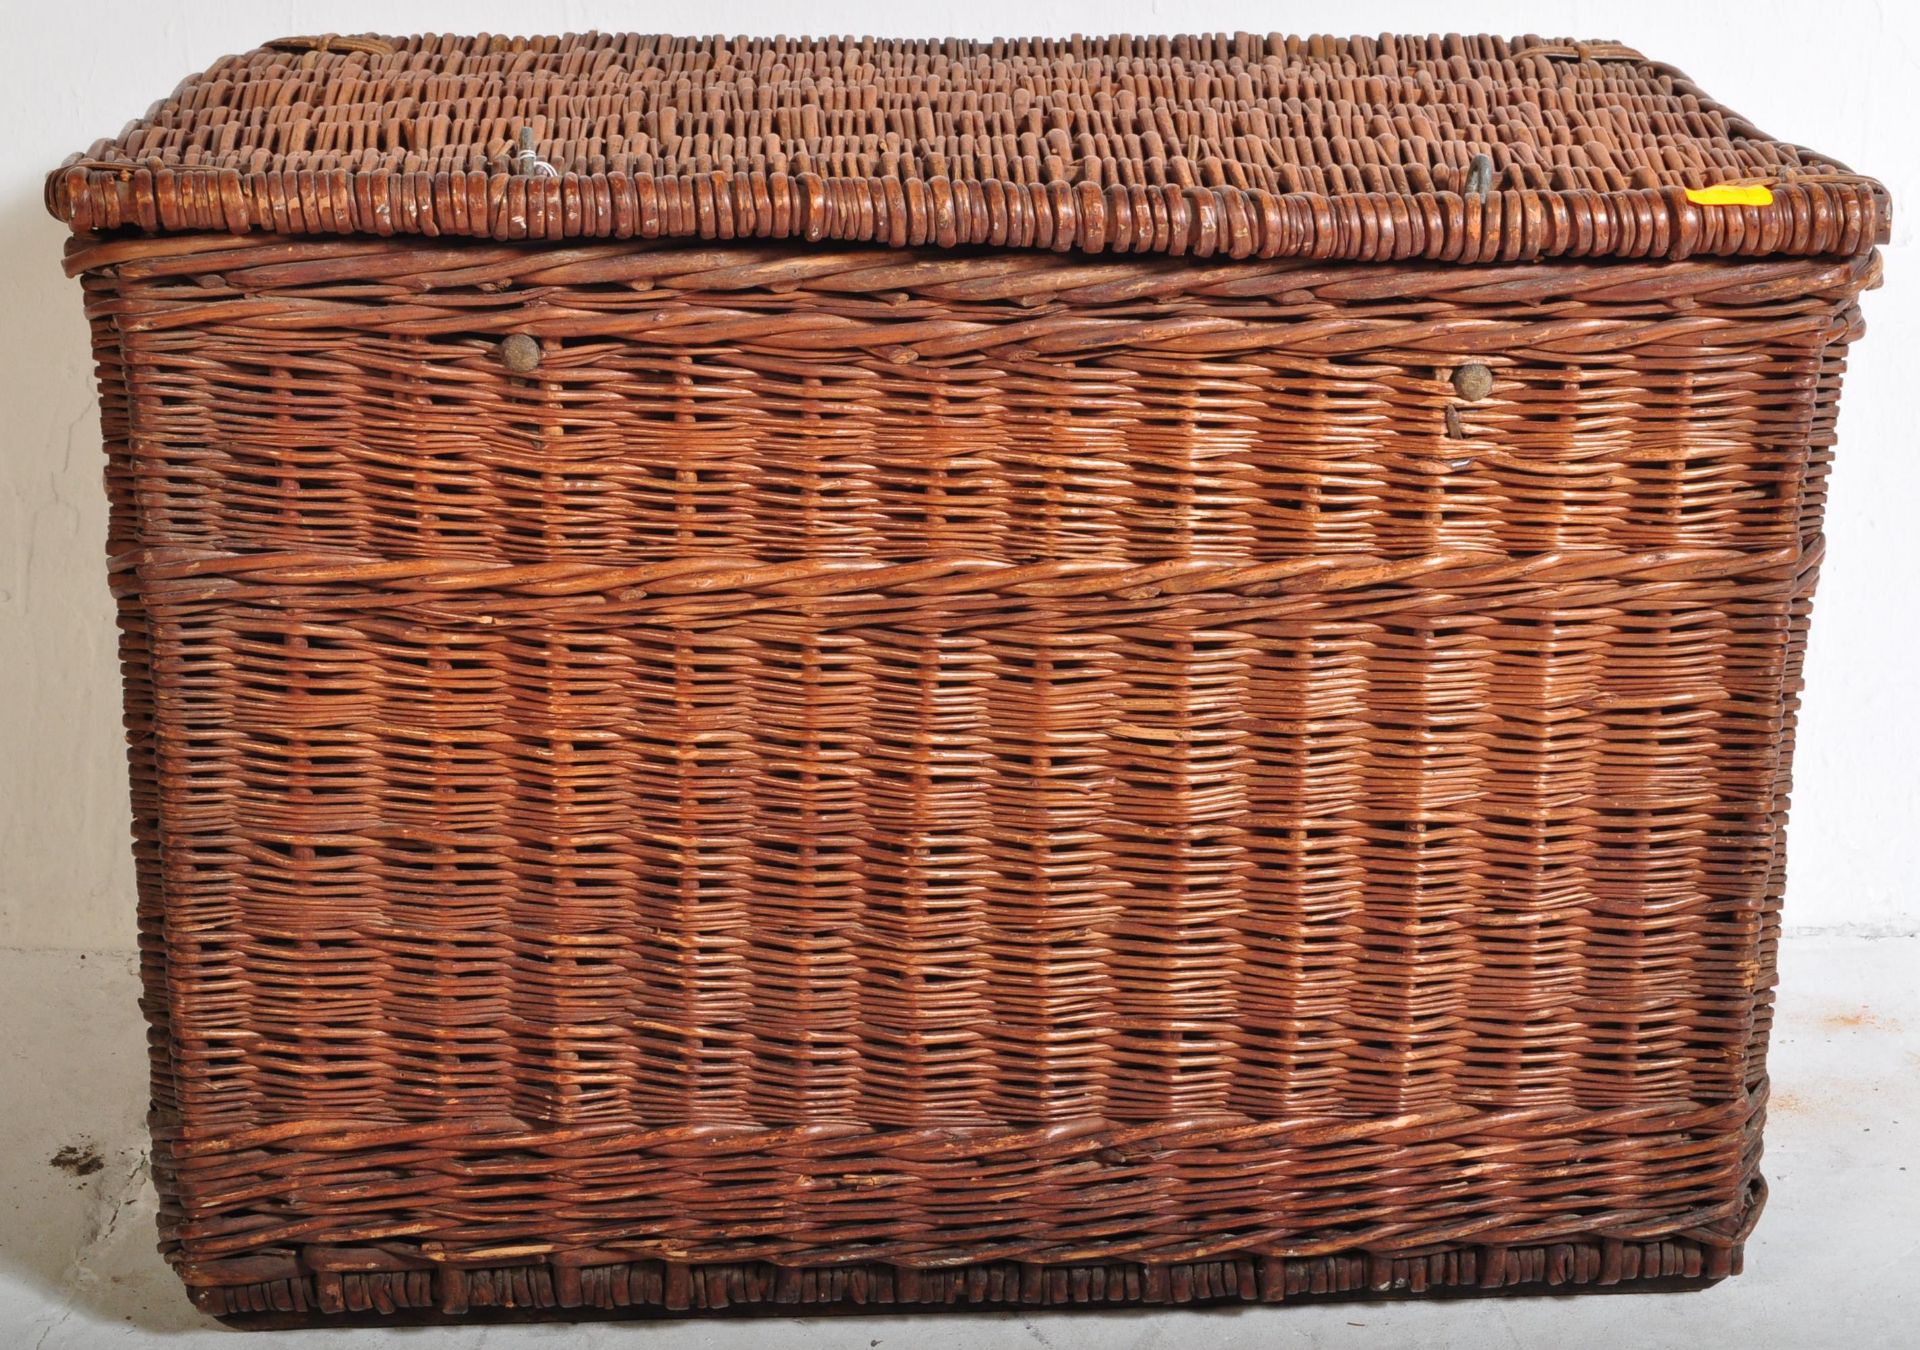 LARGE EARLY 20TH CENTURY WICKER LAUNDRY BASKET - Image 2 of 5